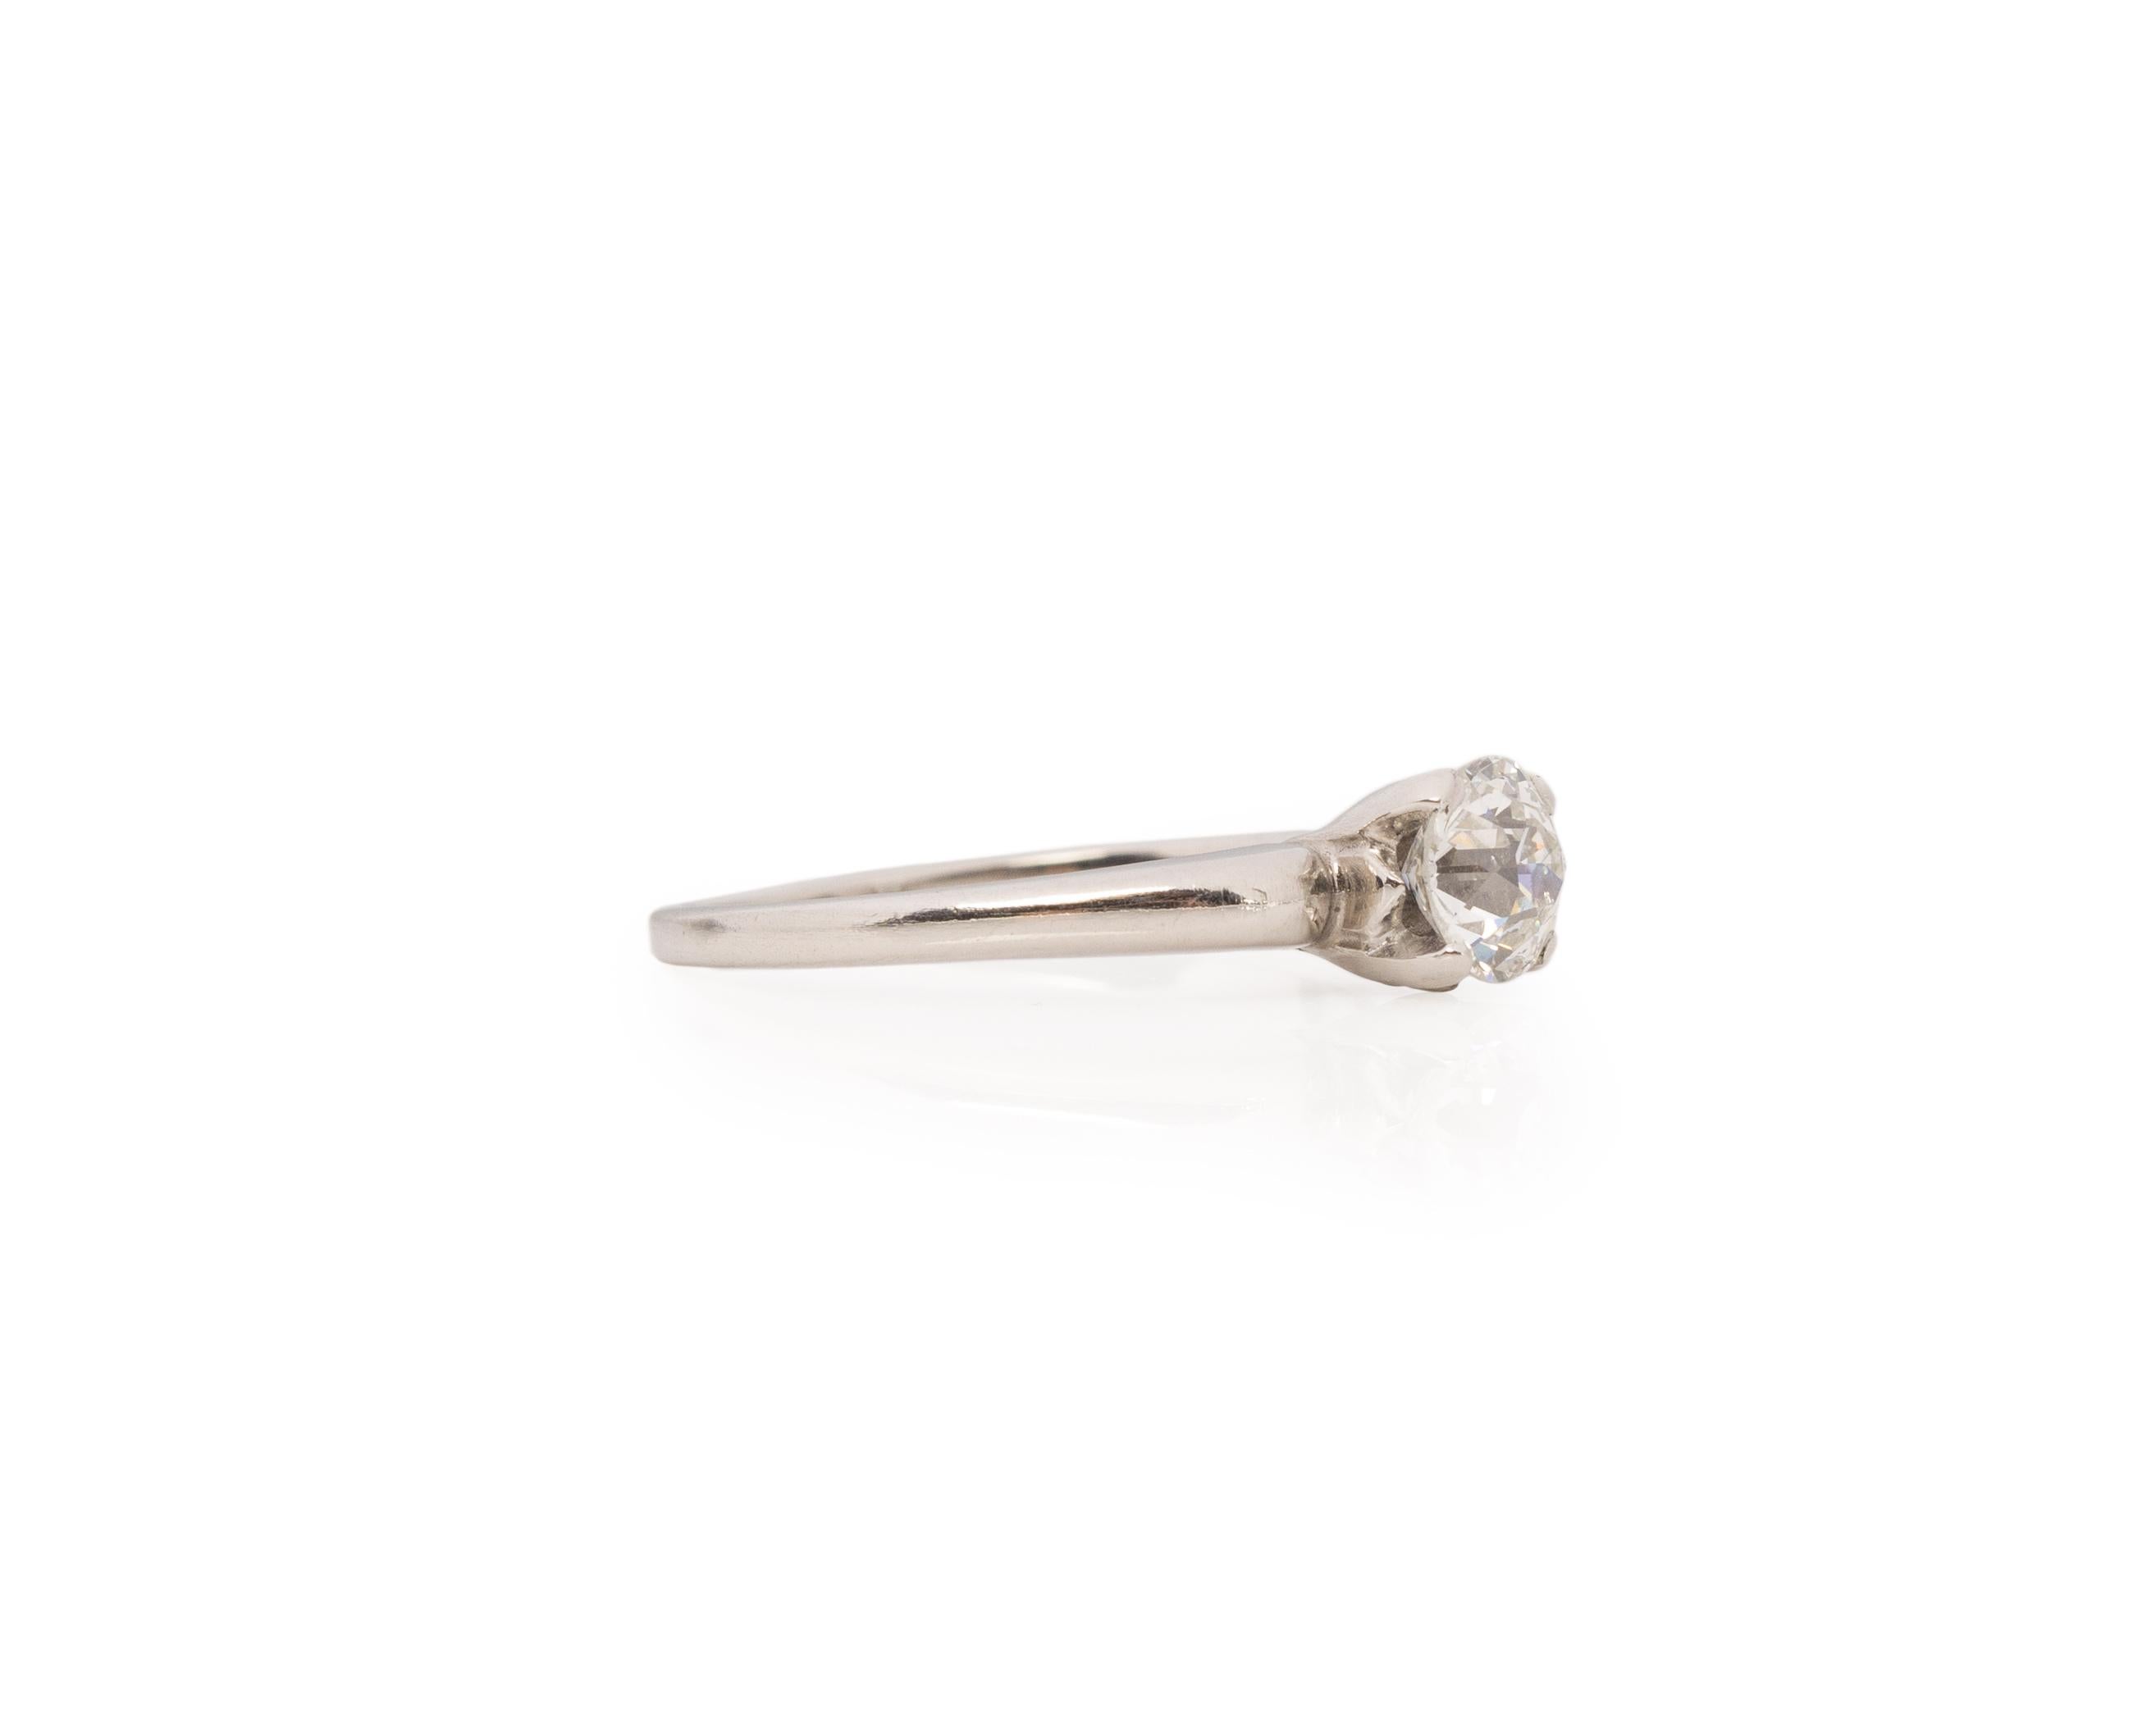 Ring Size: 7
Metal Type: Platinum [Hallmarked, and Tested]
Weight: 4.2 grams

Center Diamond Details:
GIA LAB REPORT #: 2467227448
Weight: .75ct
Cut: Old European brilliant
Color: H
Clarity: I1

Finger to Top of Stone Measurement: 5.5mm
Shank/Band